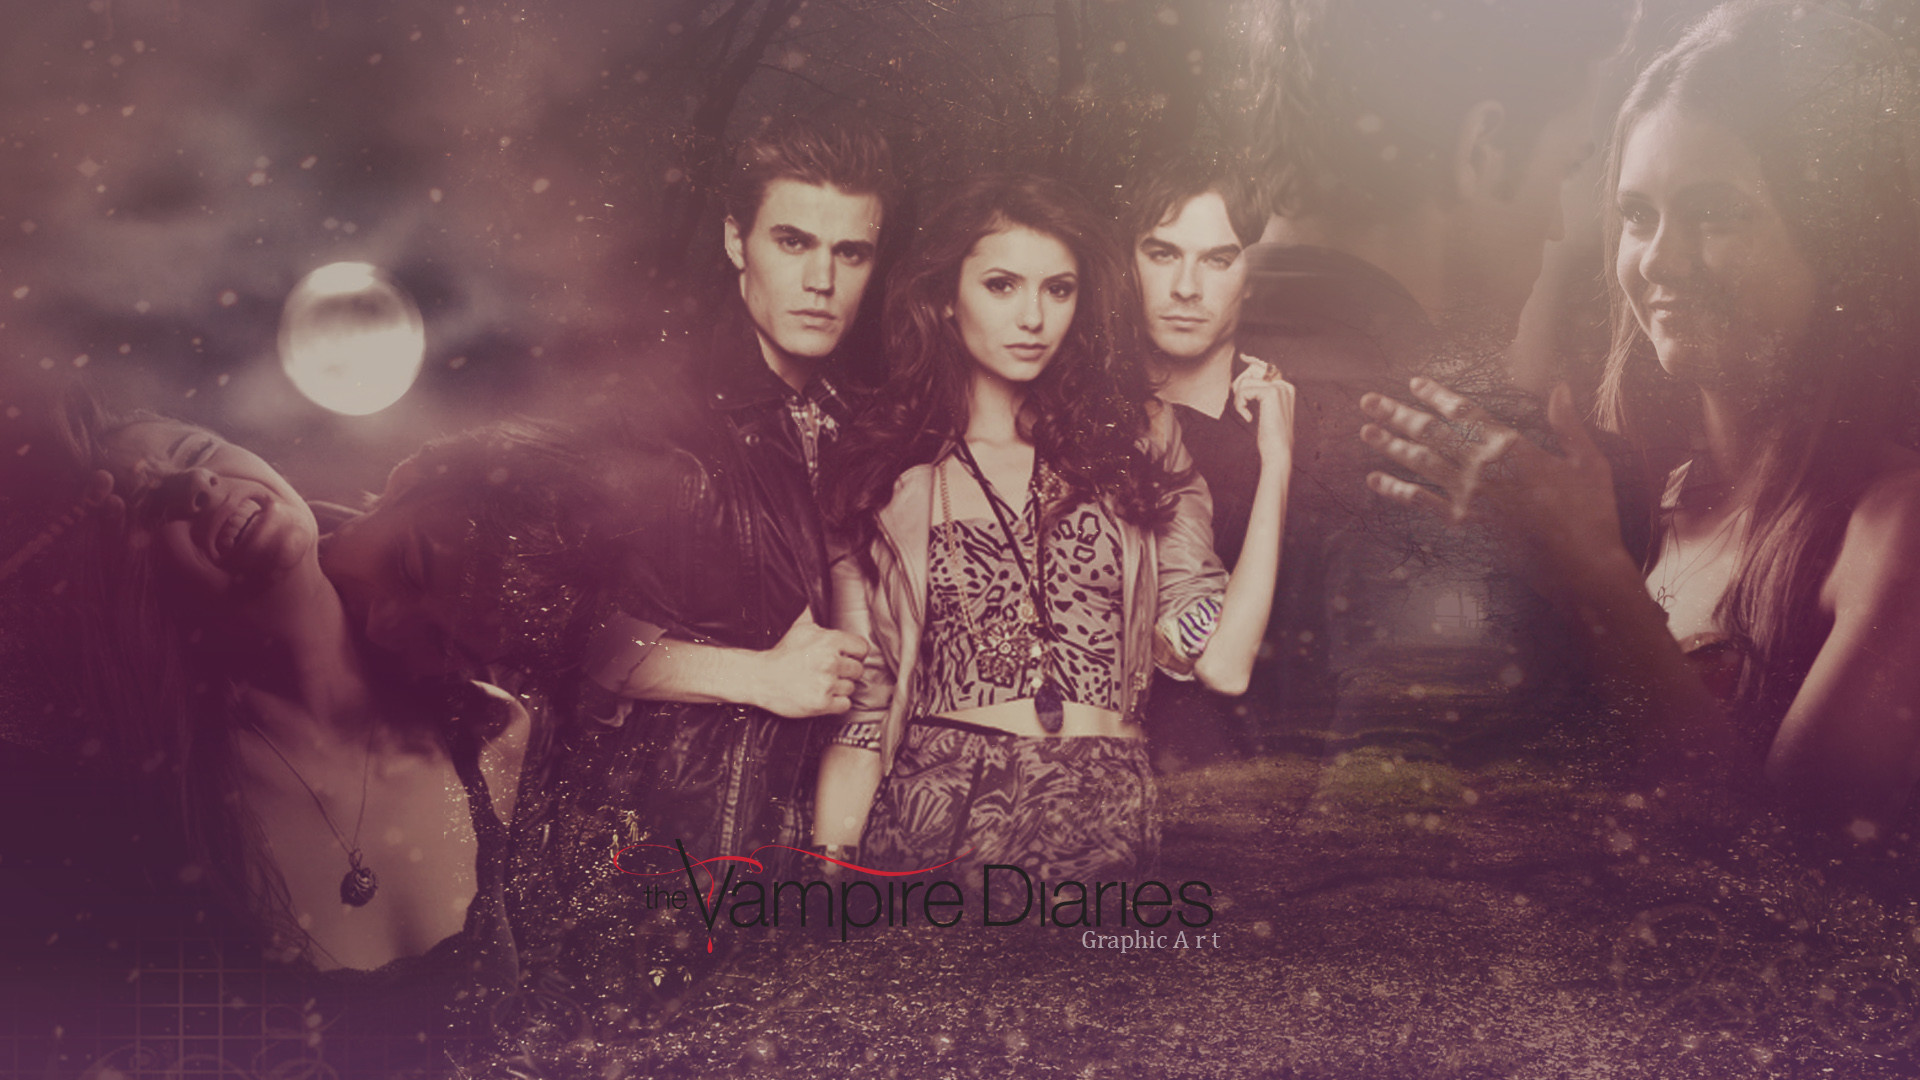 1920x1080 The Vampire Diaries wallpaper by StefinaGraphicART The Vampire Diaries  wallpaper by StefinaGraphicART